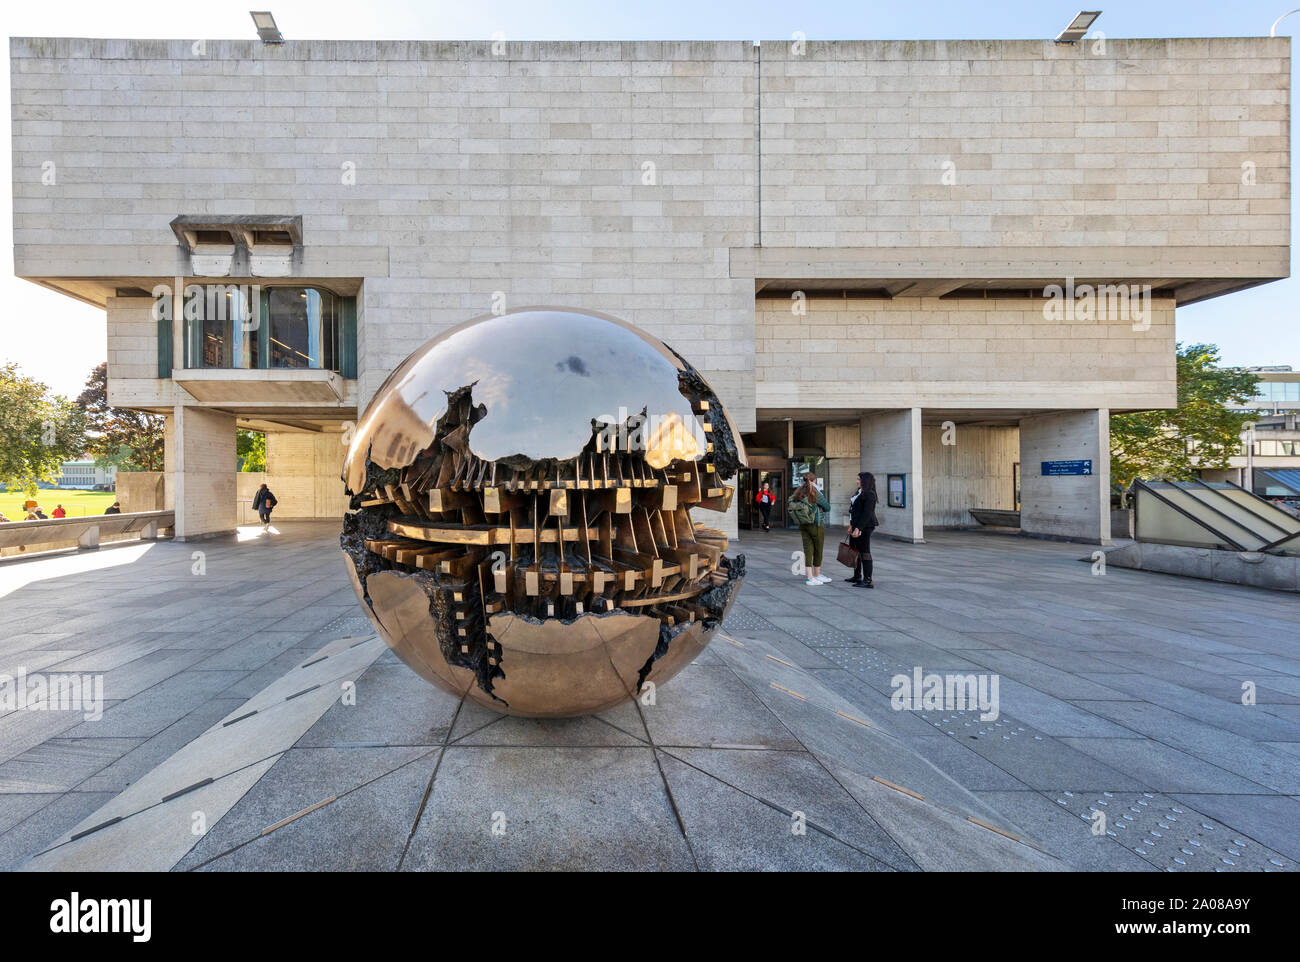 The Sphere within Sphere (a sculpture) at Trinity College in Dublin, Ireland. Stock Photo